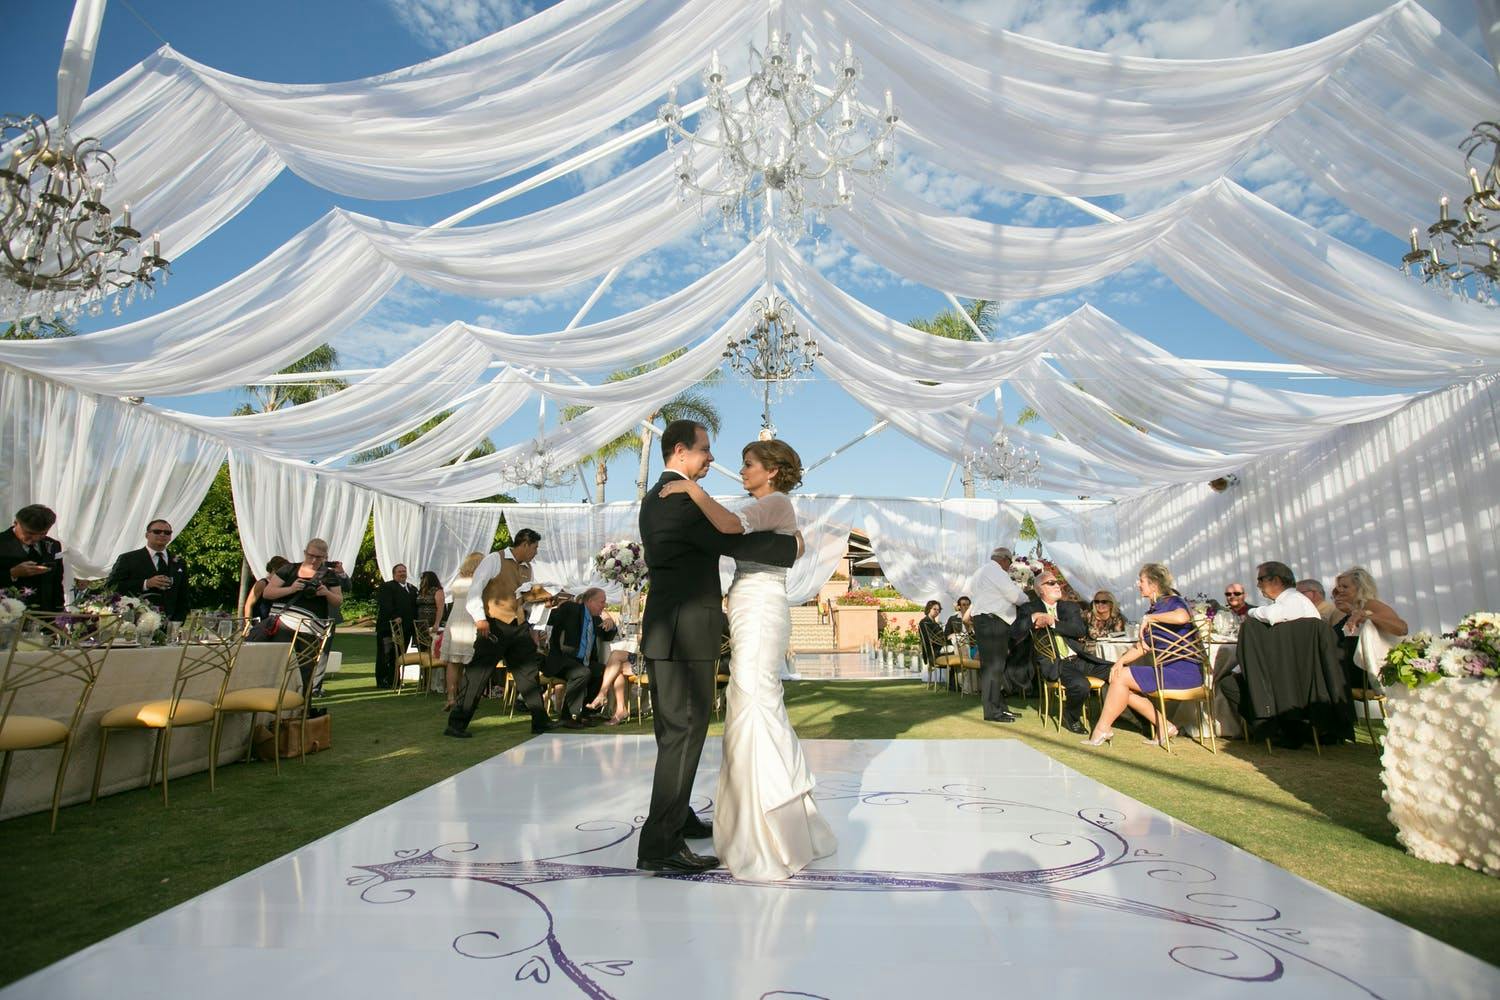 8 Popular Ways to Have a Memorable Tent Wedding - PartySlate